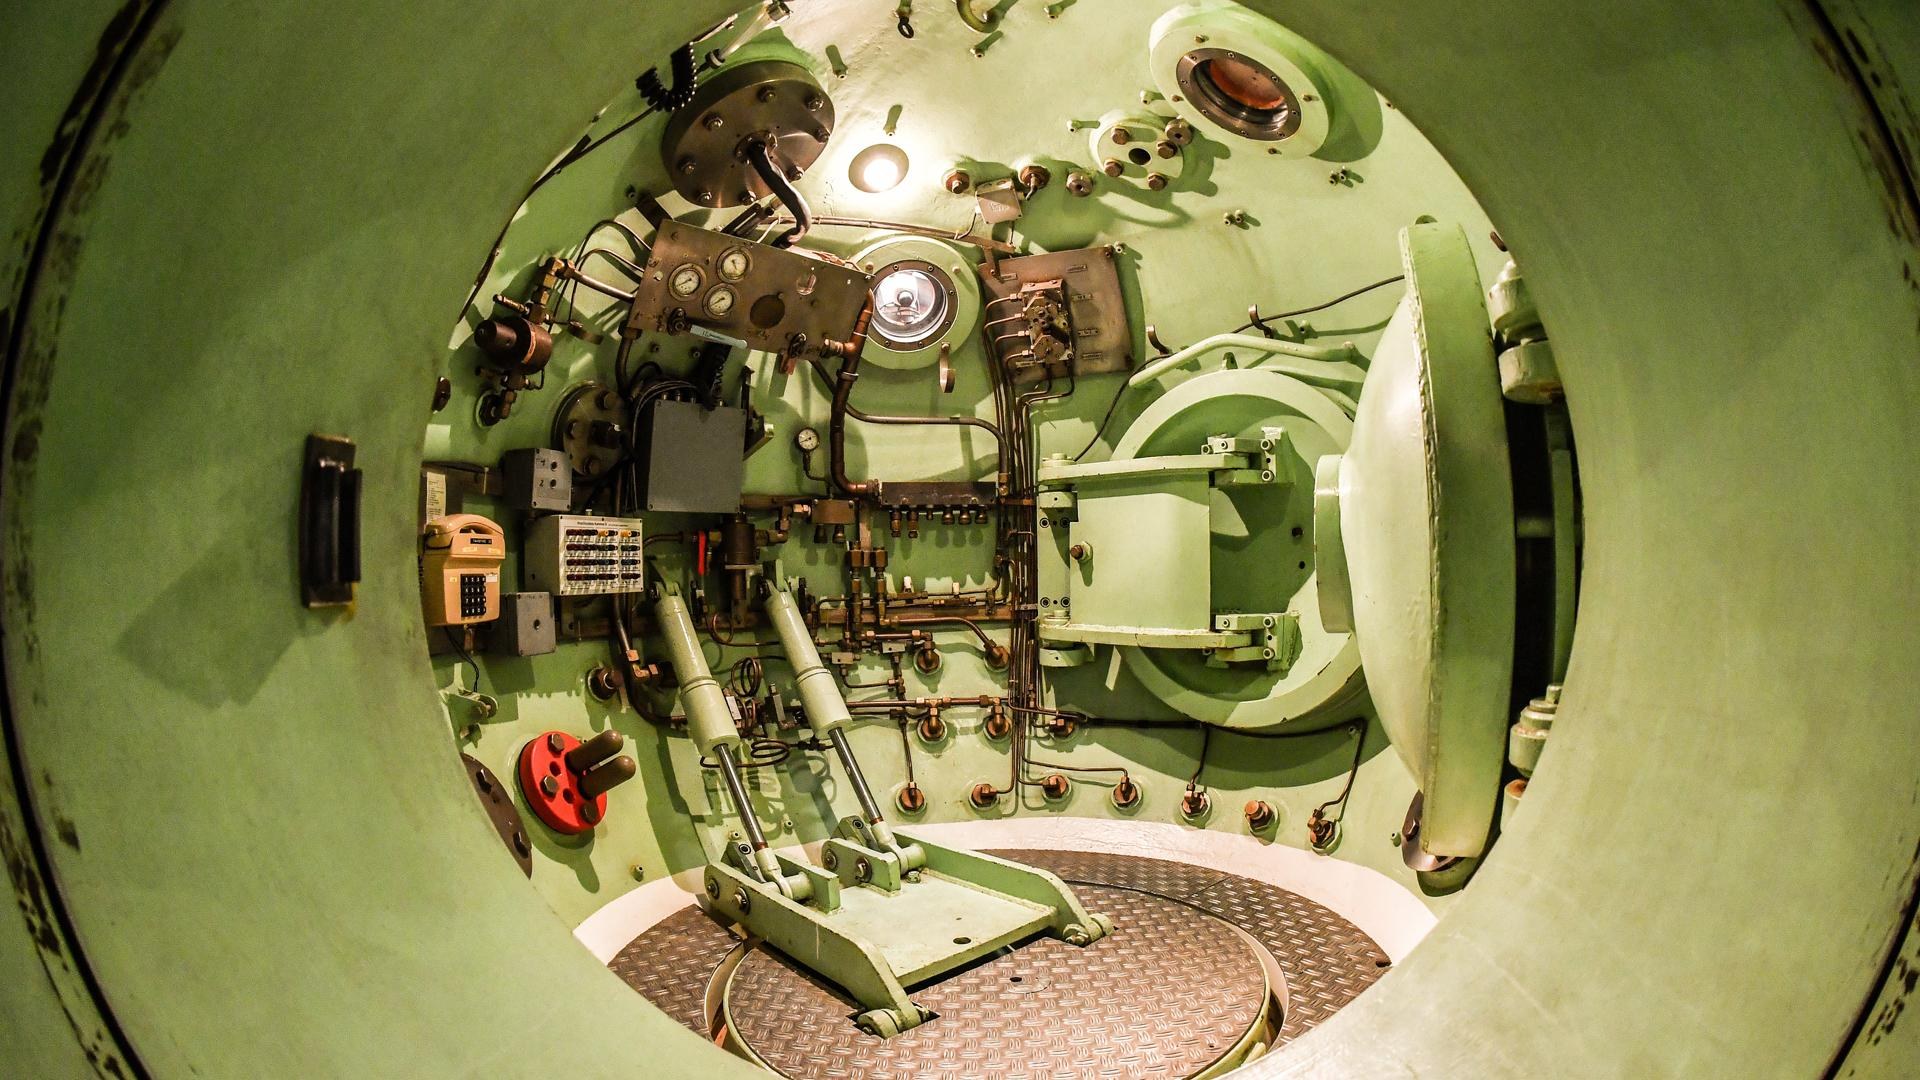 Entrance of the DLR pressure chamber